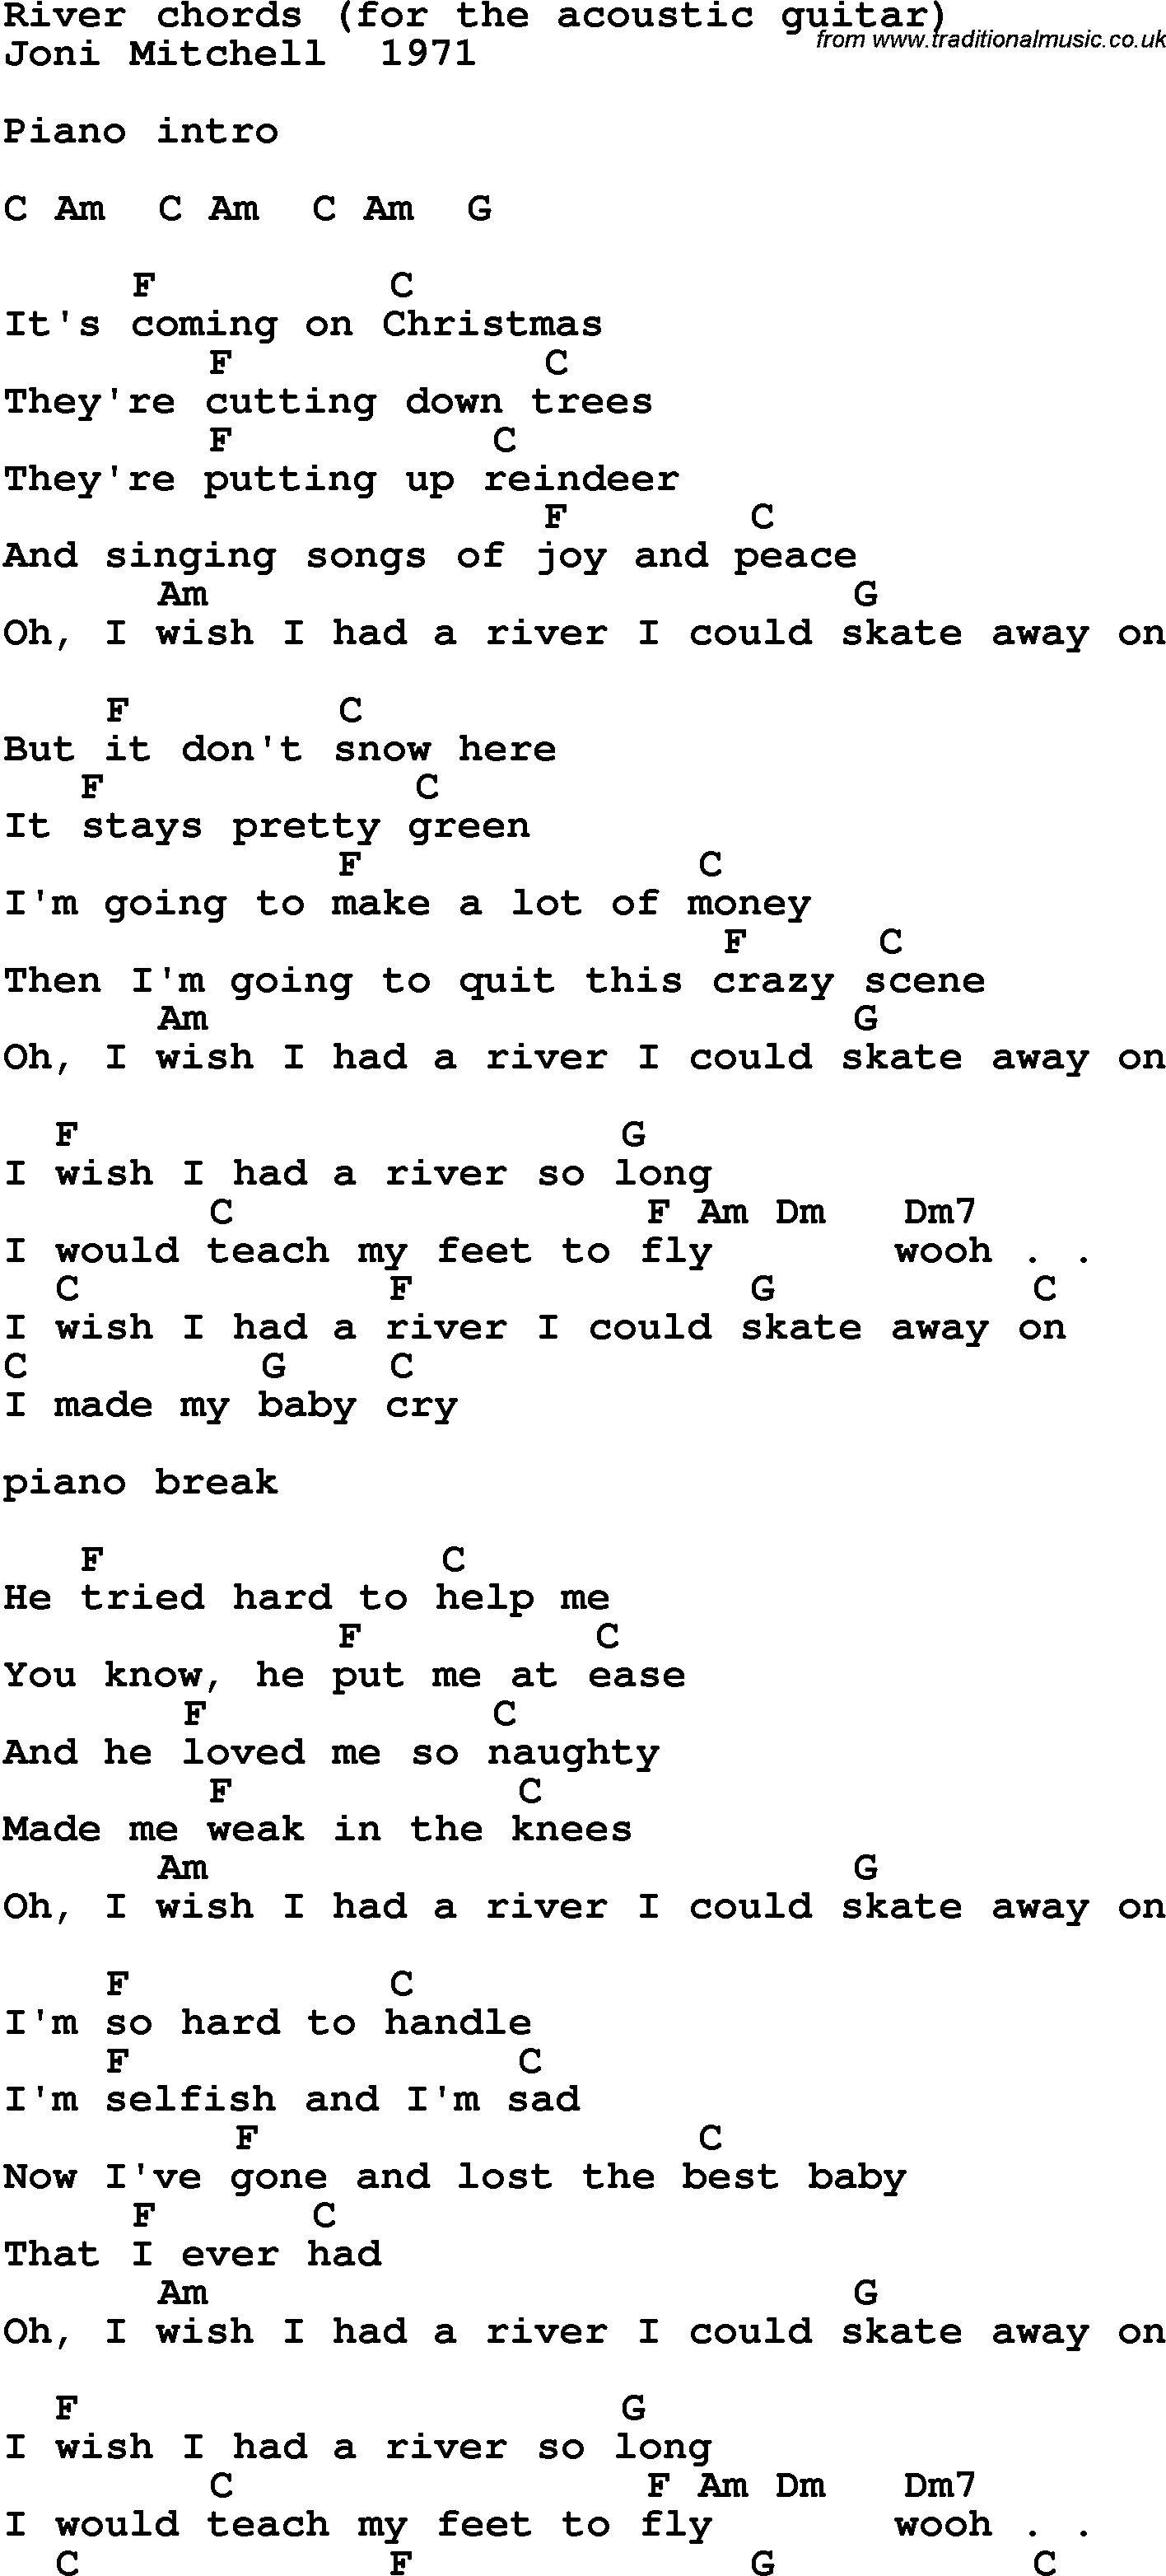 Song Lyrics with guitar chords for River